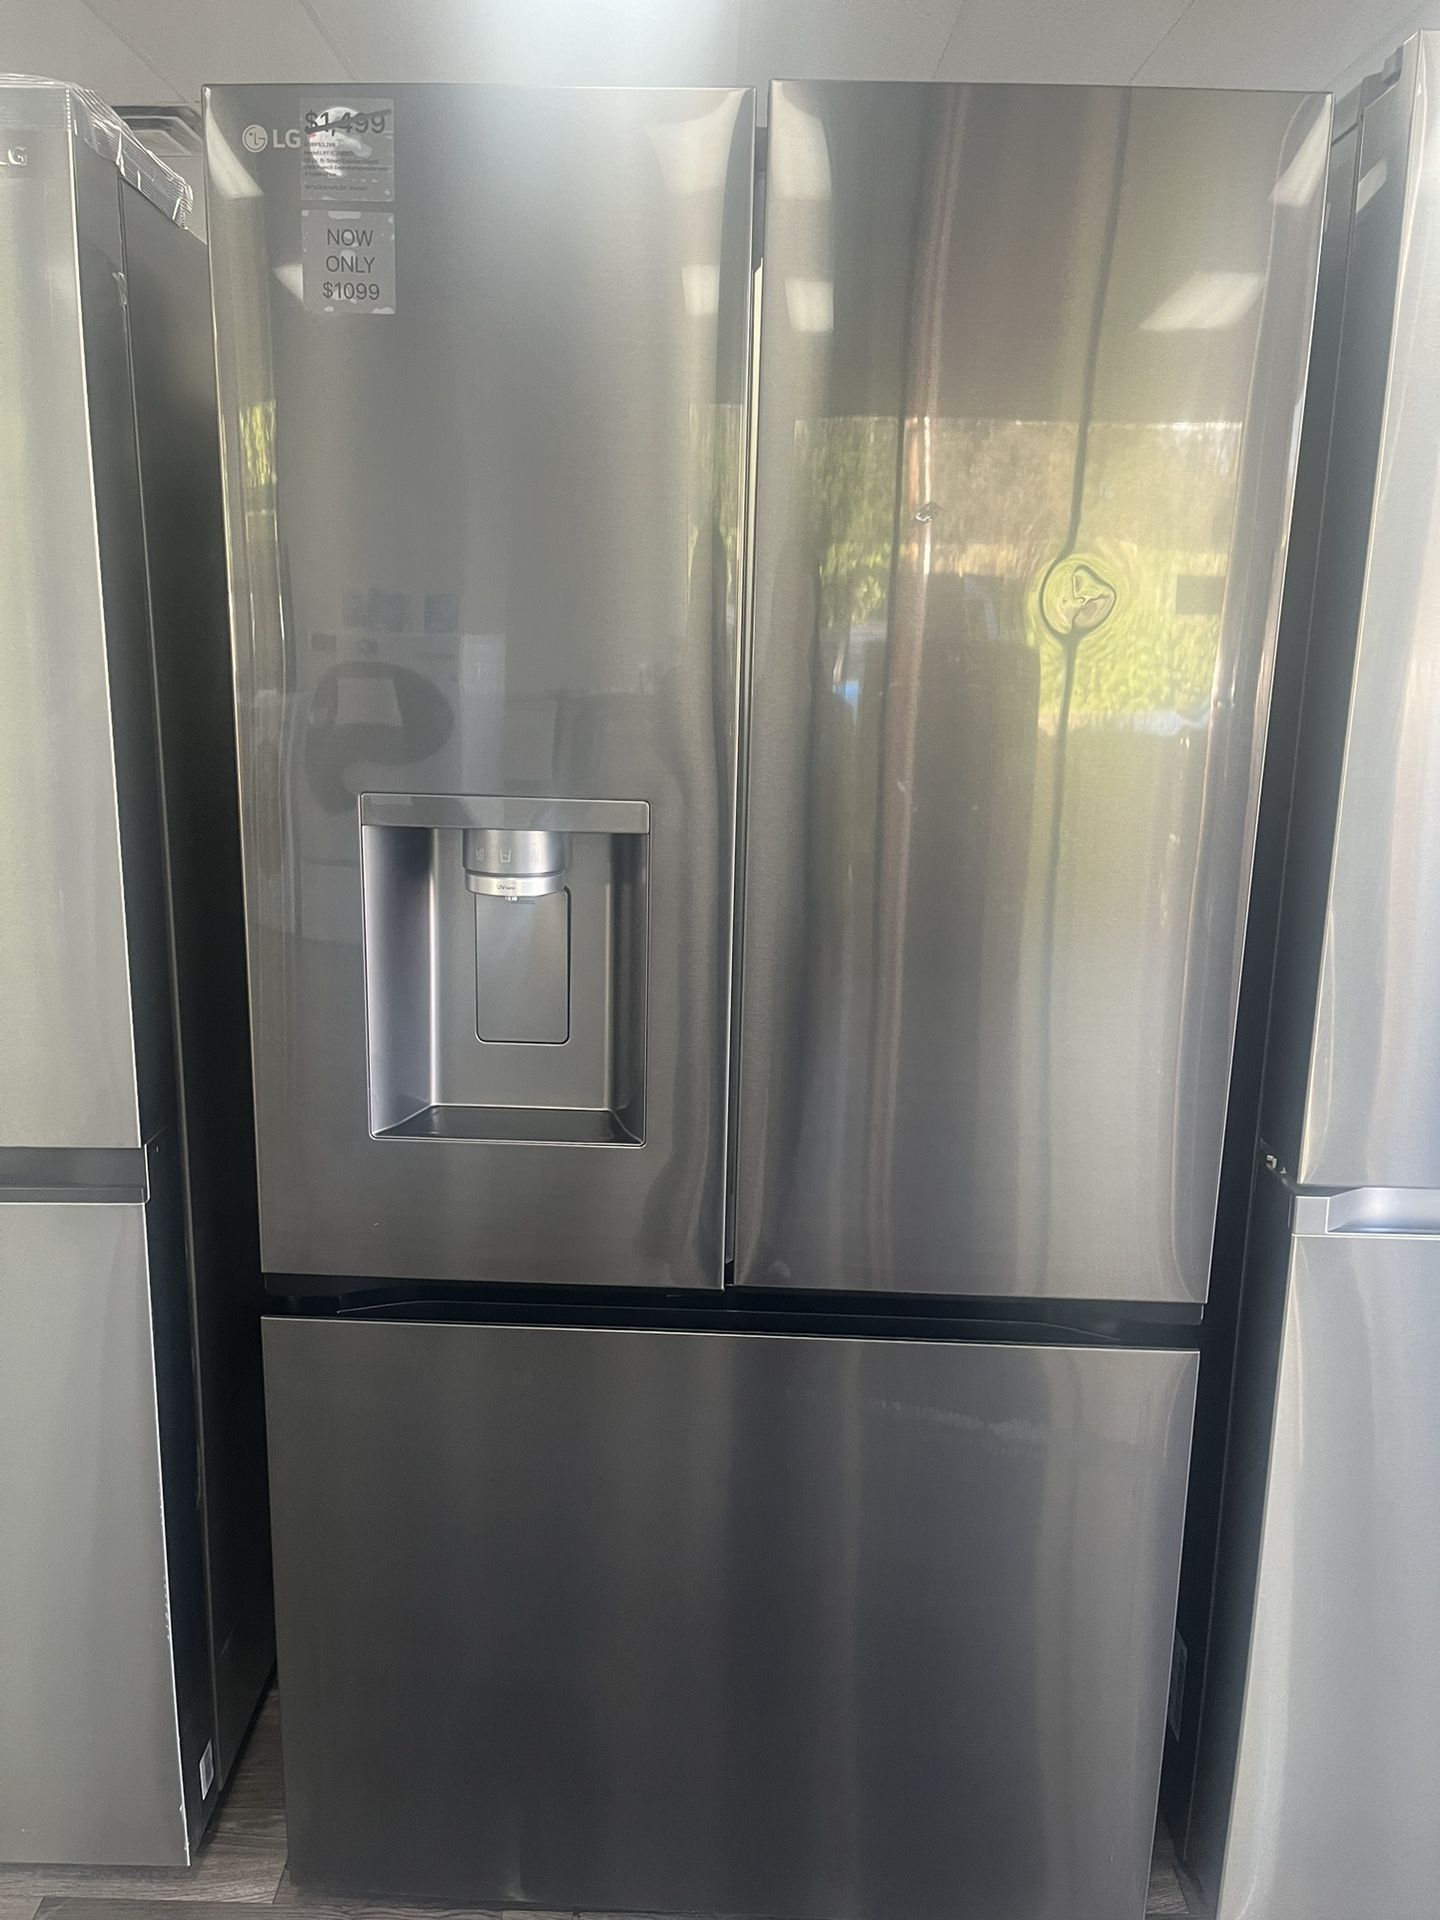 Limited Time! $1099 Open Box Black Stainless Steel Counter Depth Fridge Was$3299